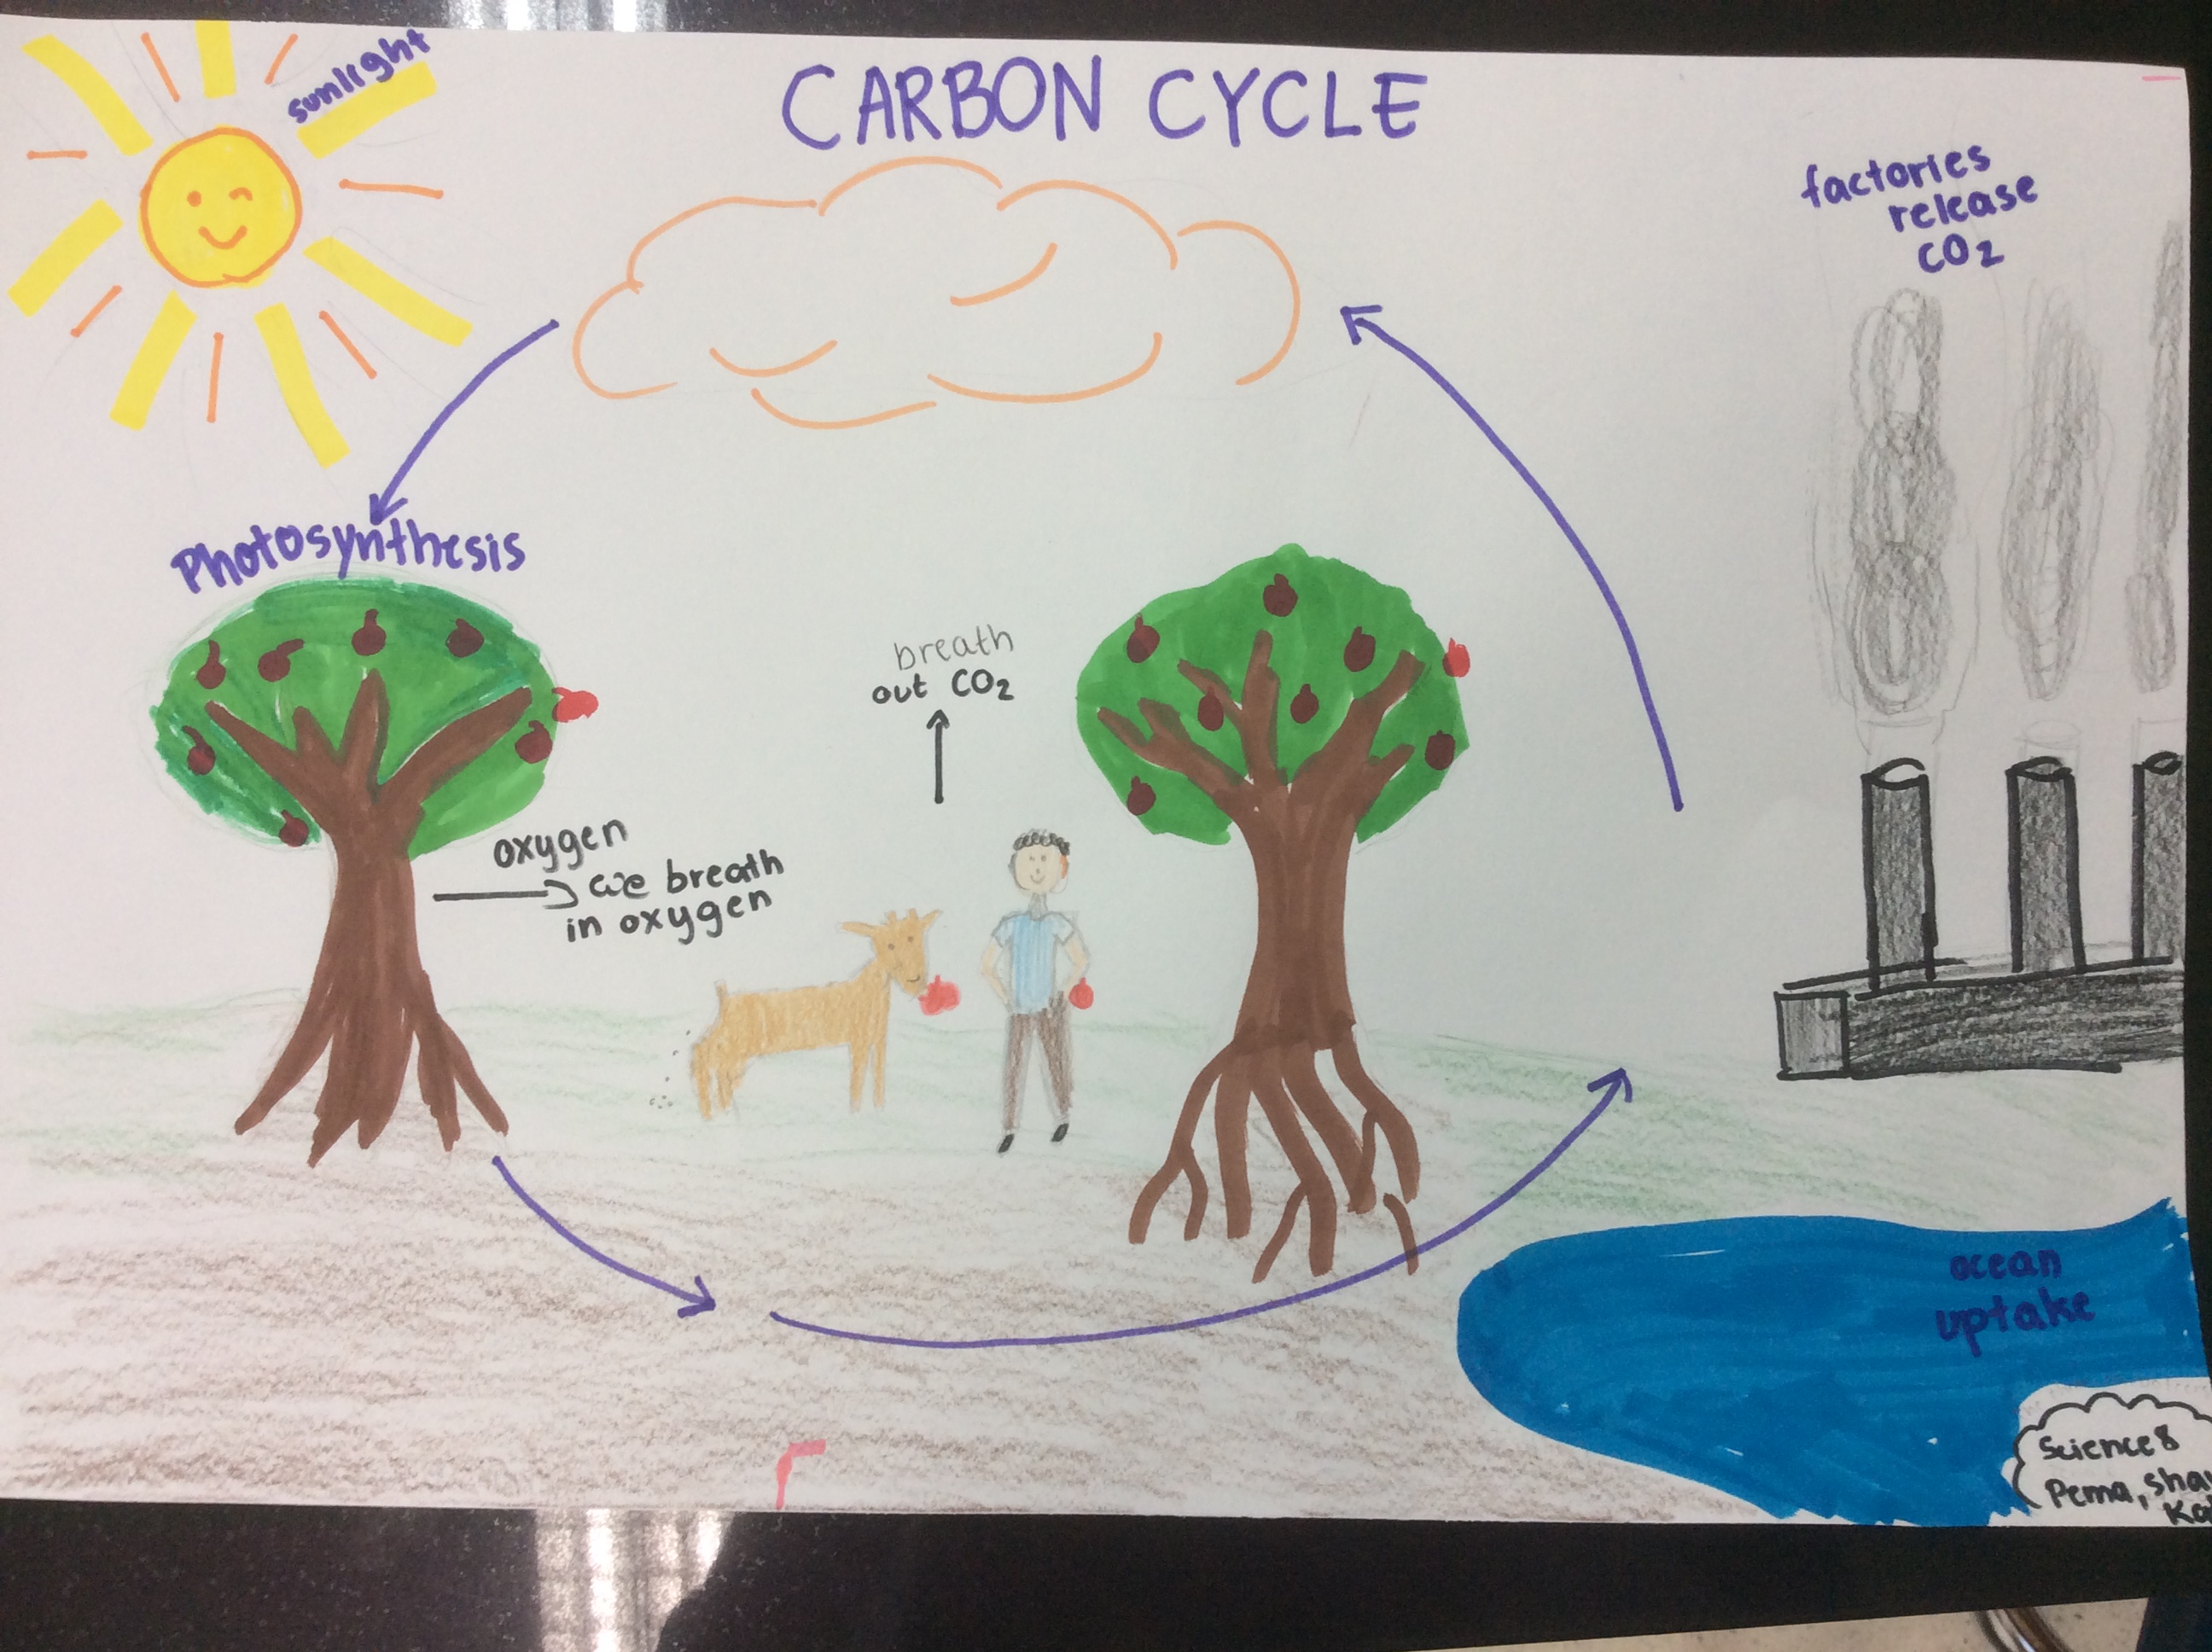 Draw The Picture Seen On The Co2 O2 Cycle Poster